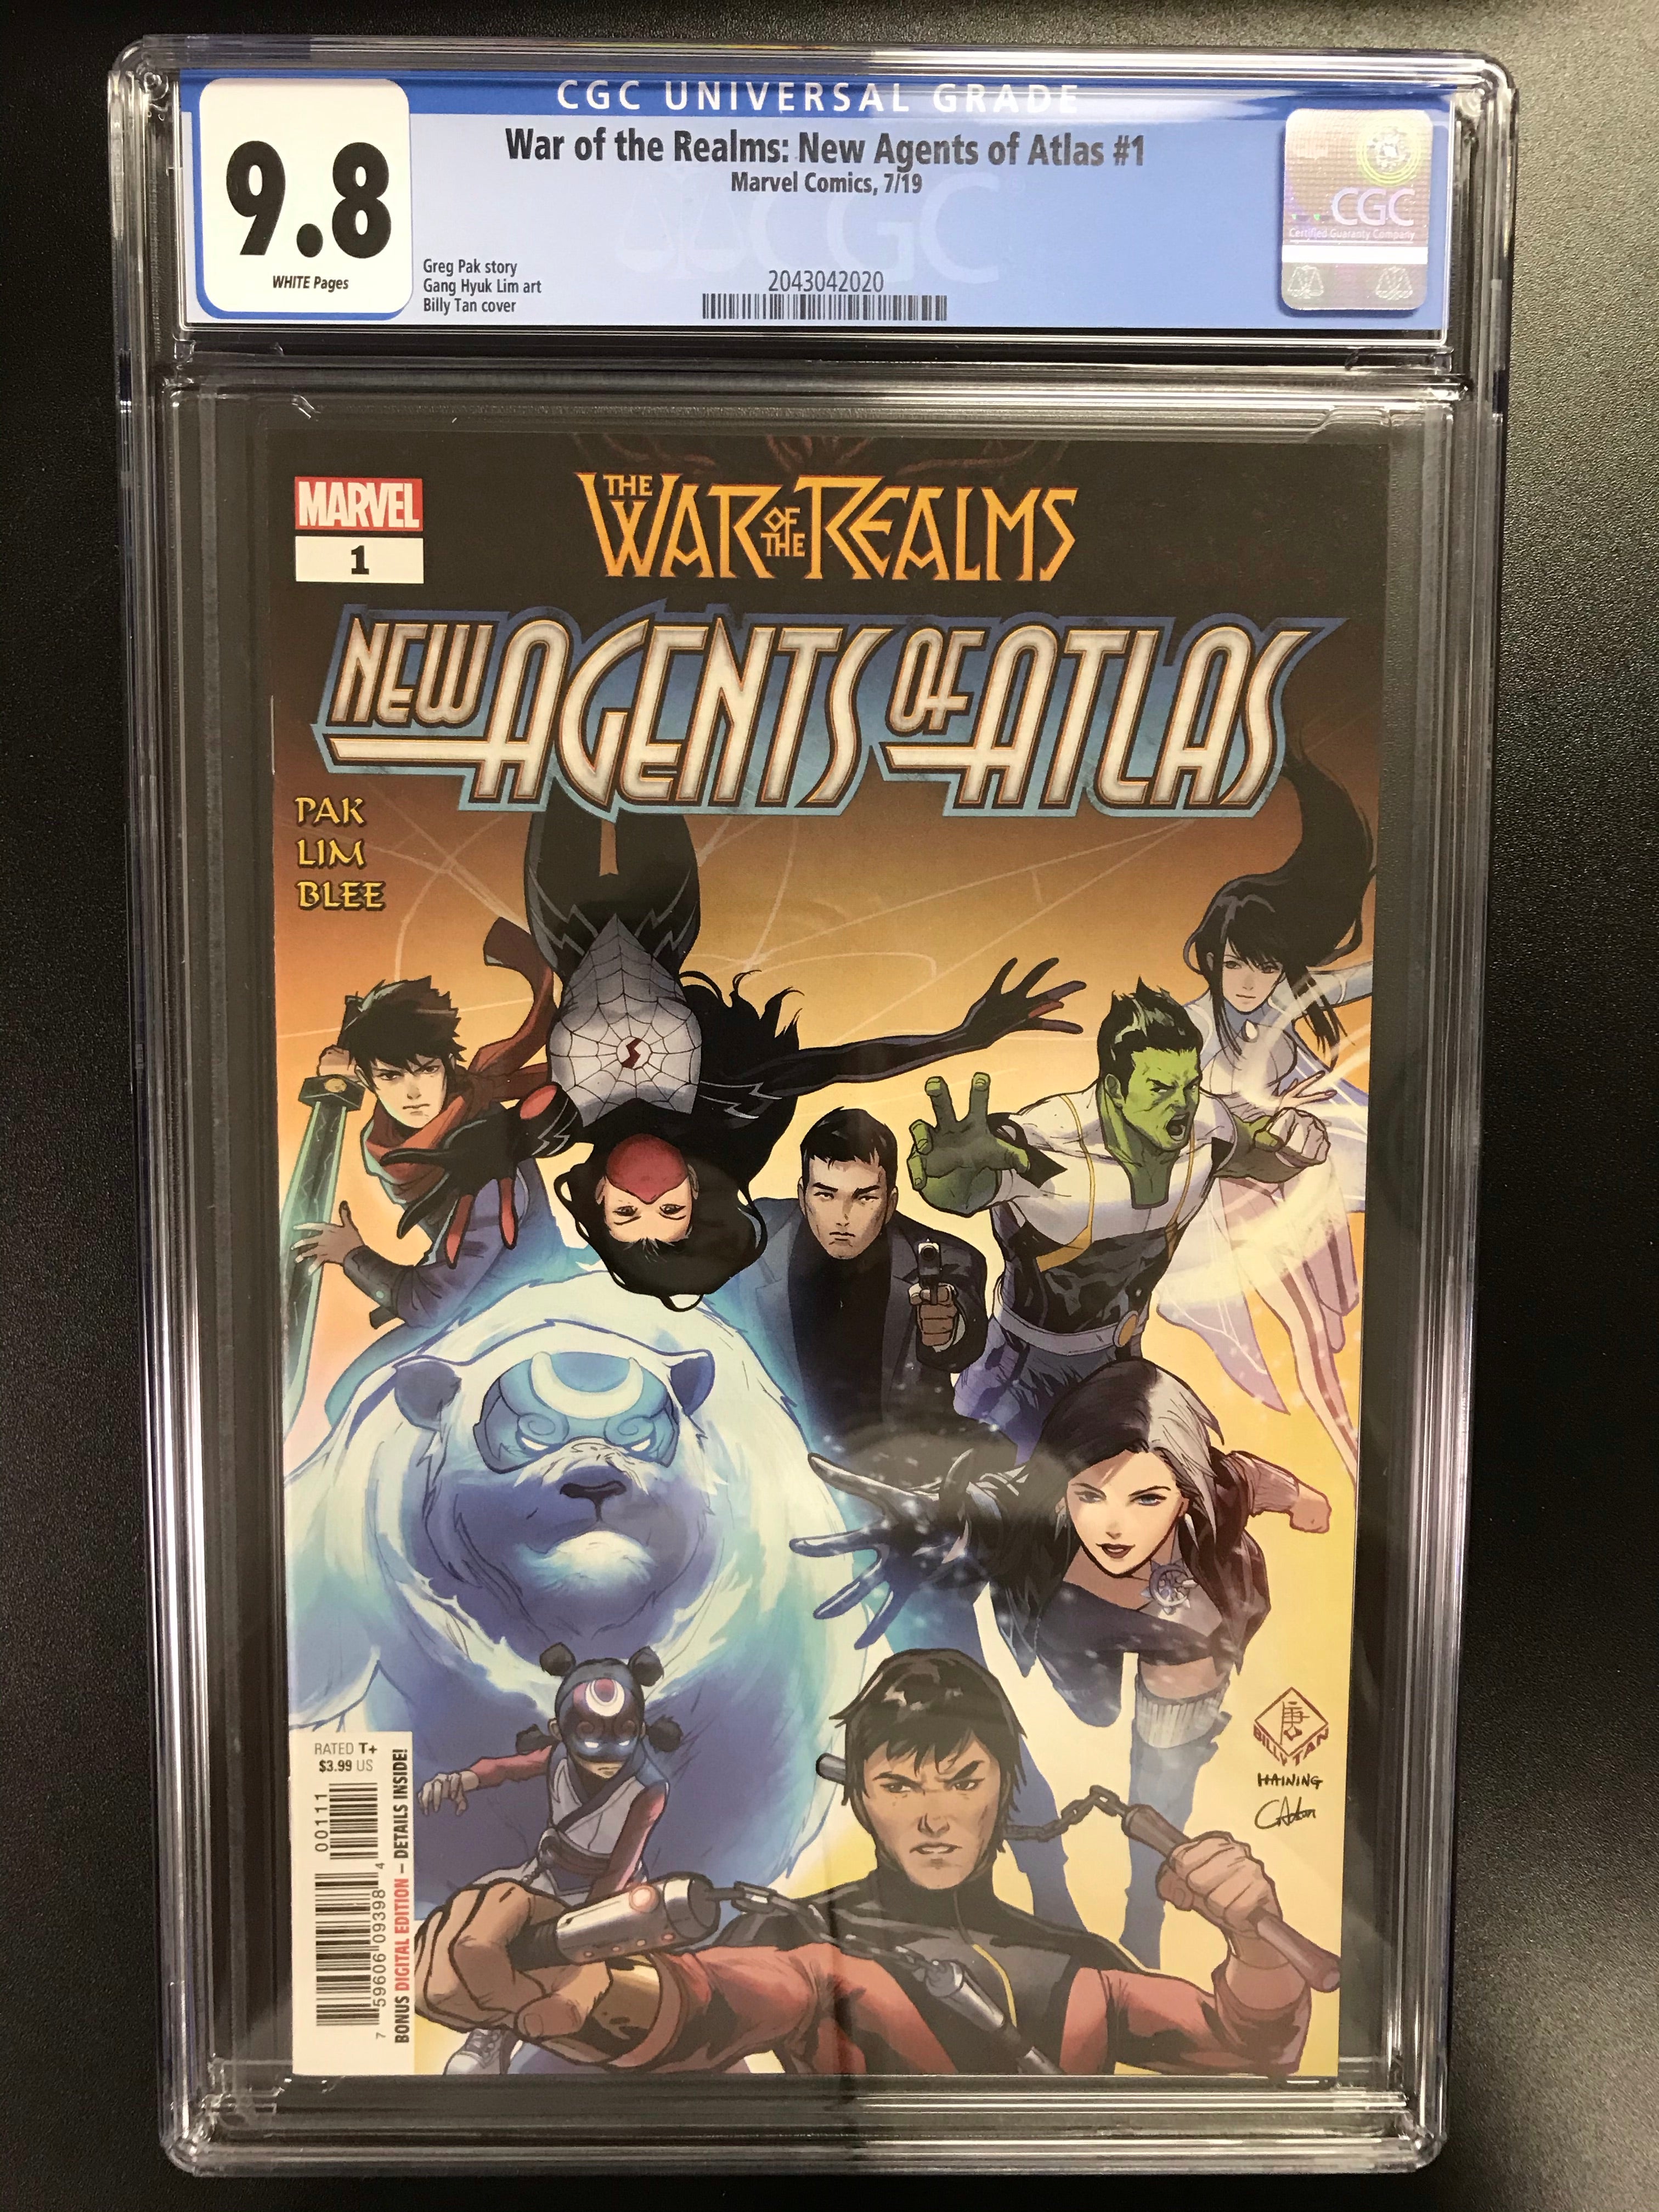 WAR OF REALMS NEW AGENTS OF ATLAS #1 CGC 9.8 (IN STOCK)